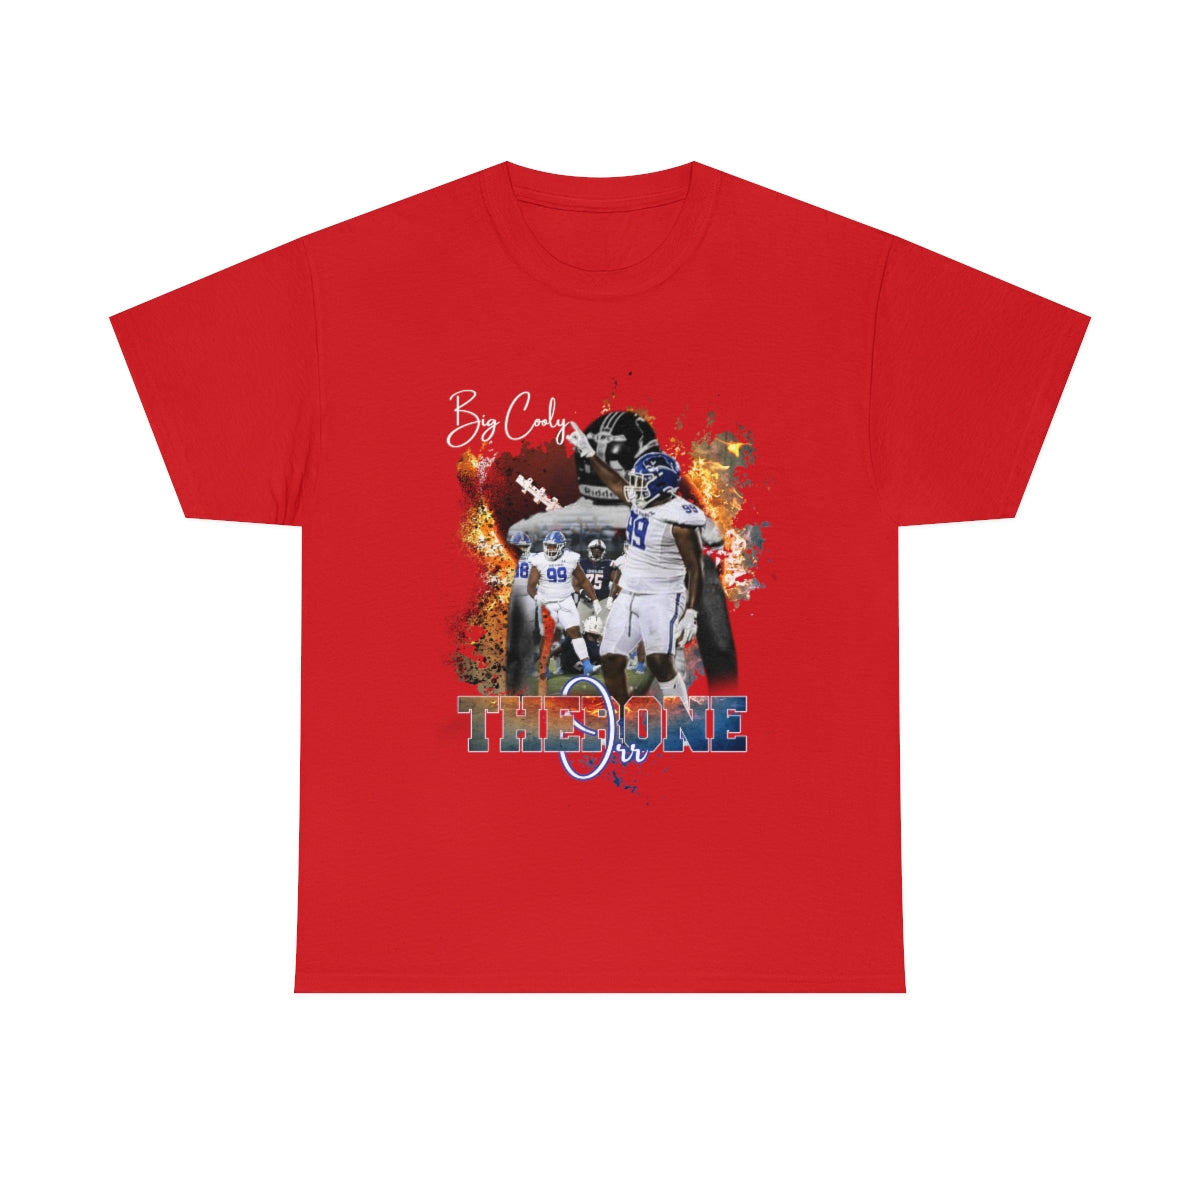 Therone Orr Graphic Tee